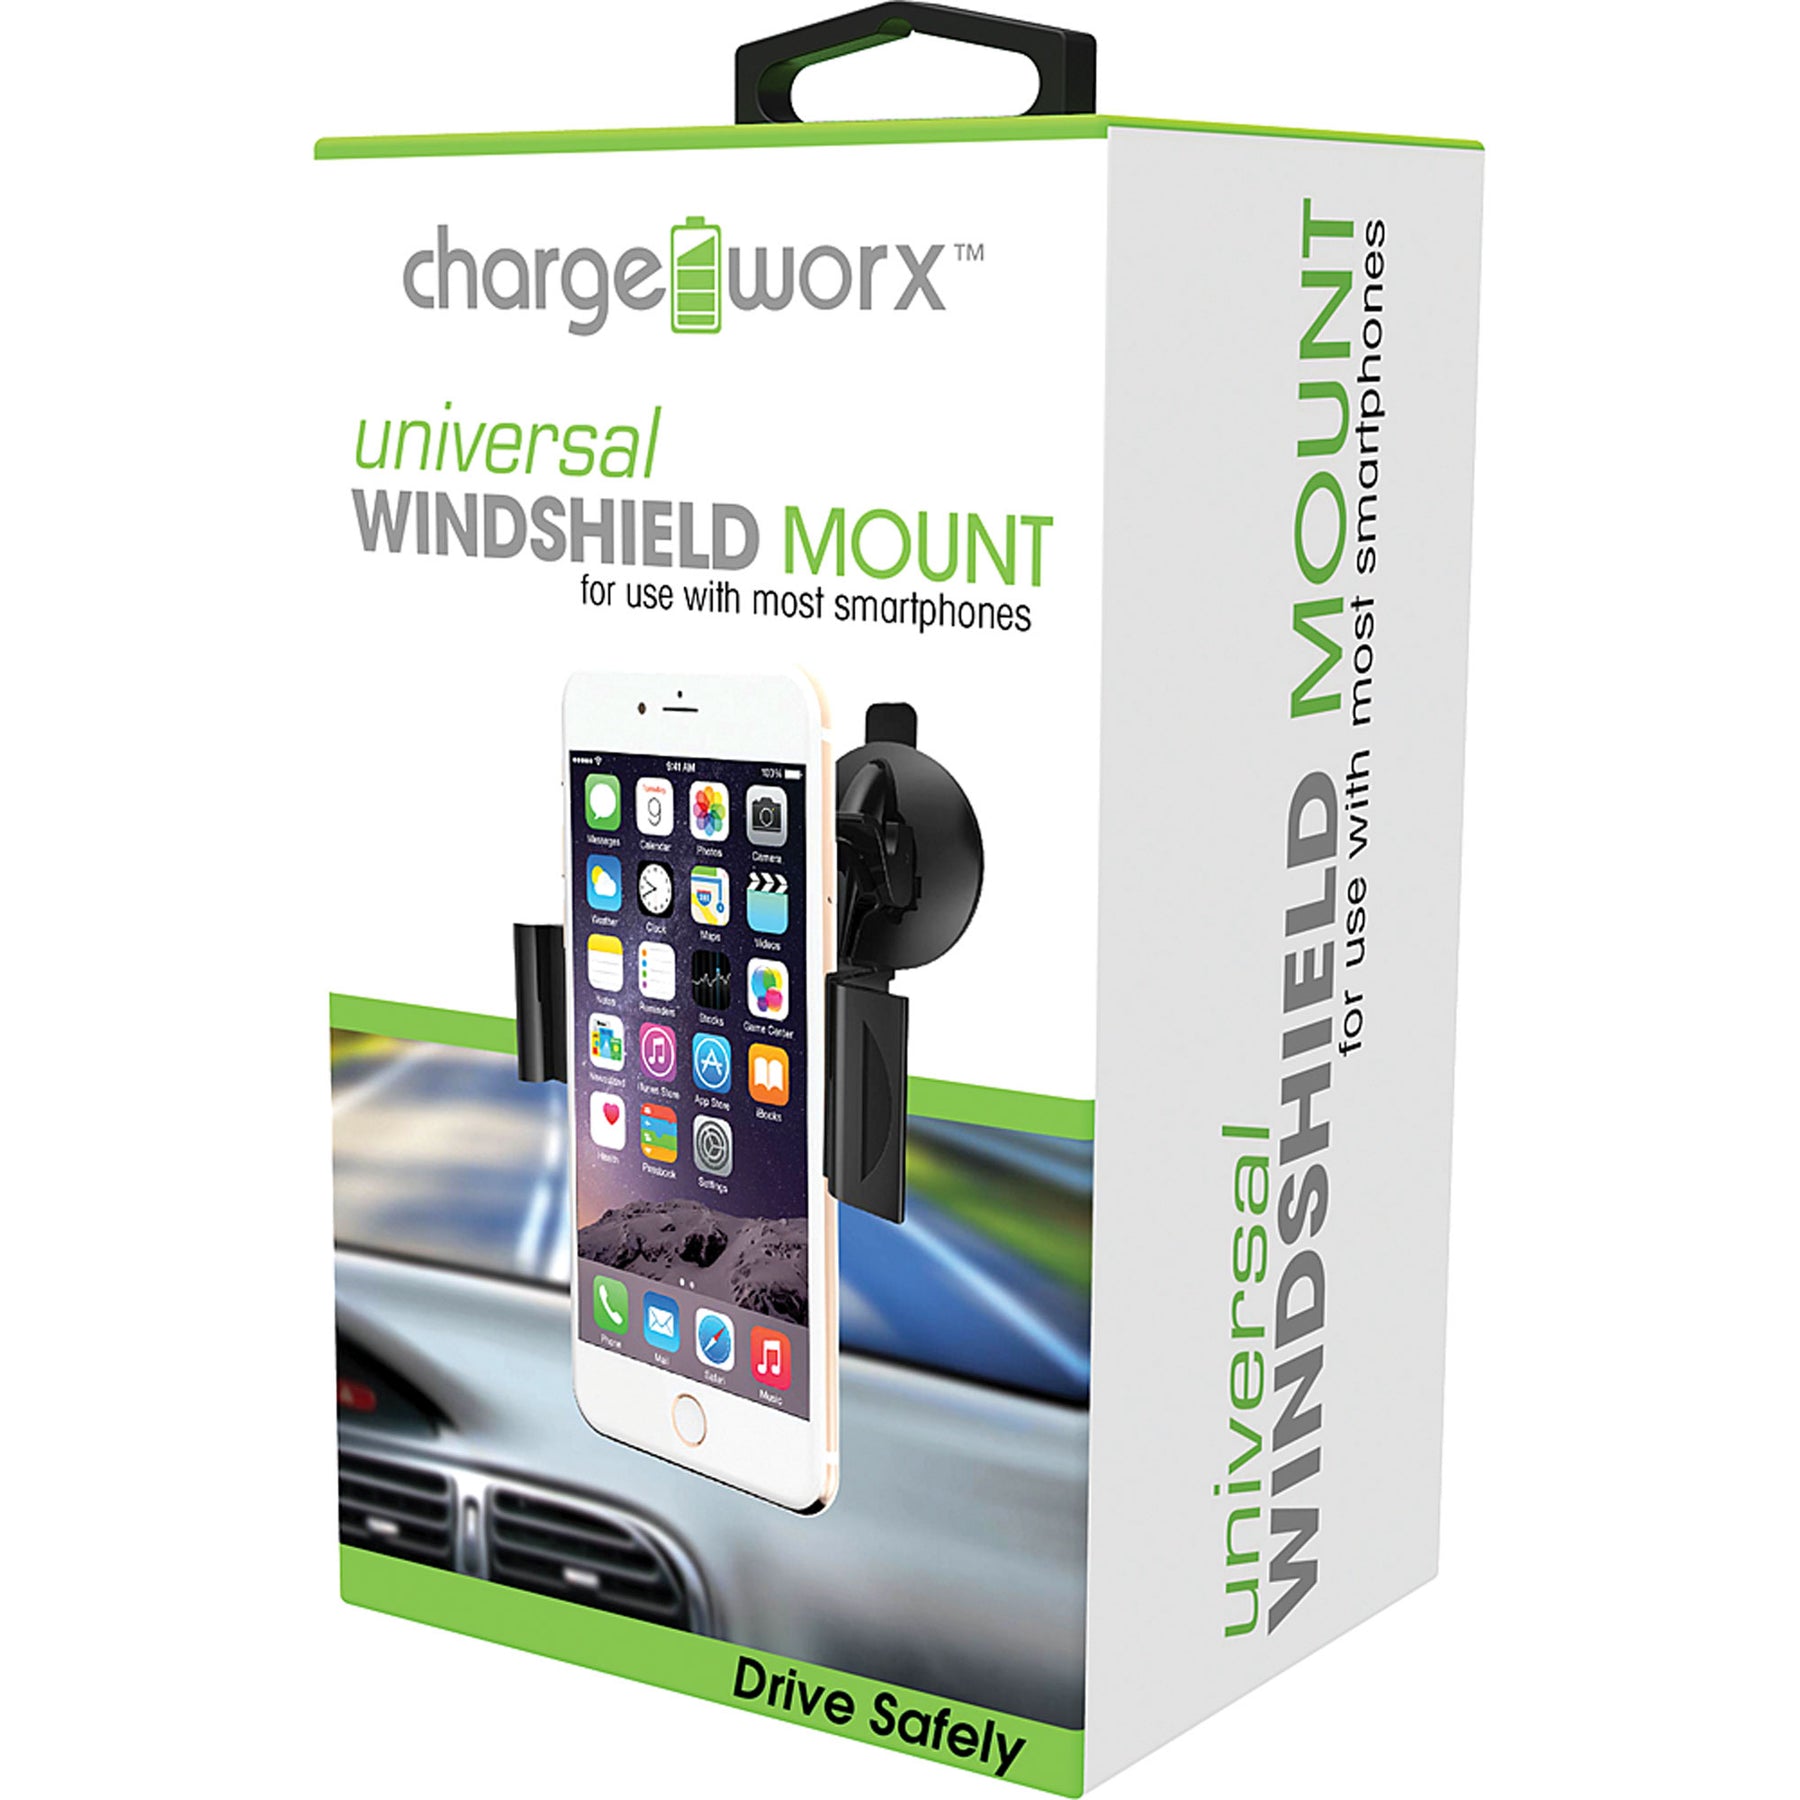 Chargeworx CX9905BK Windshield Mount for use with most smartphones